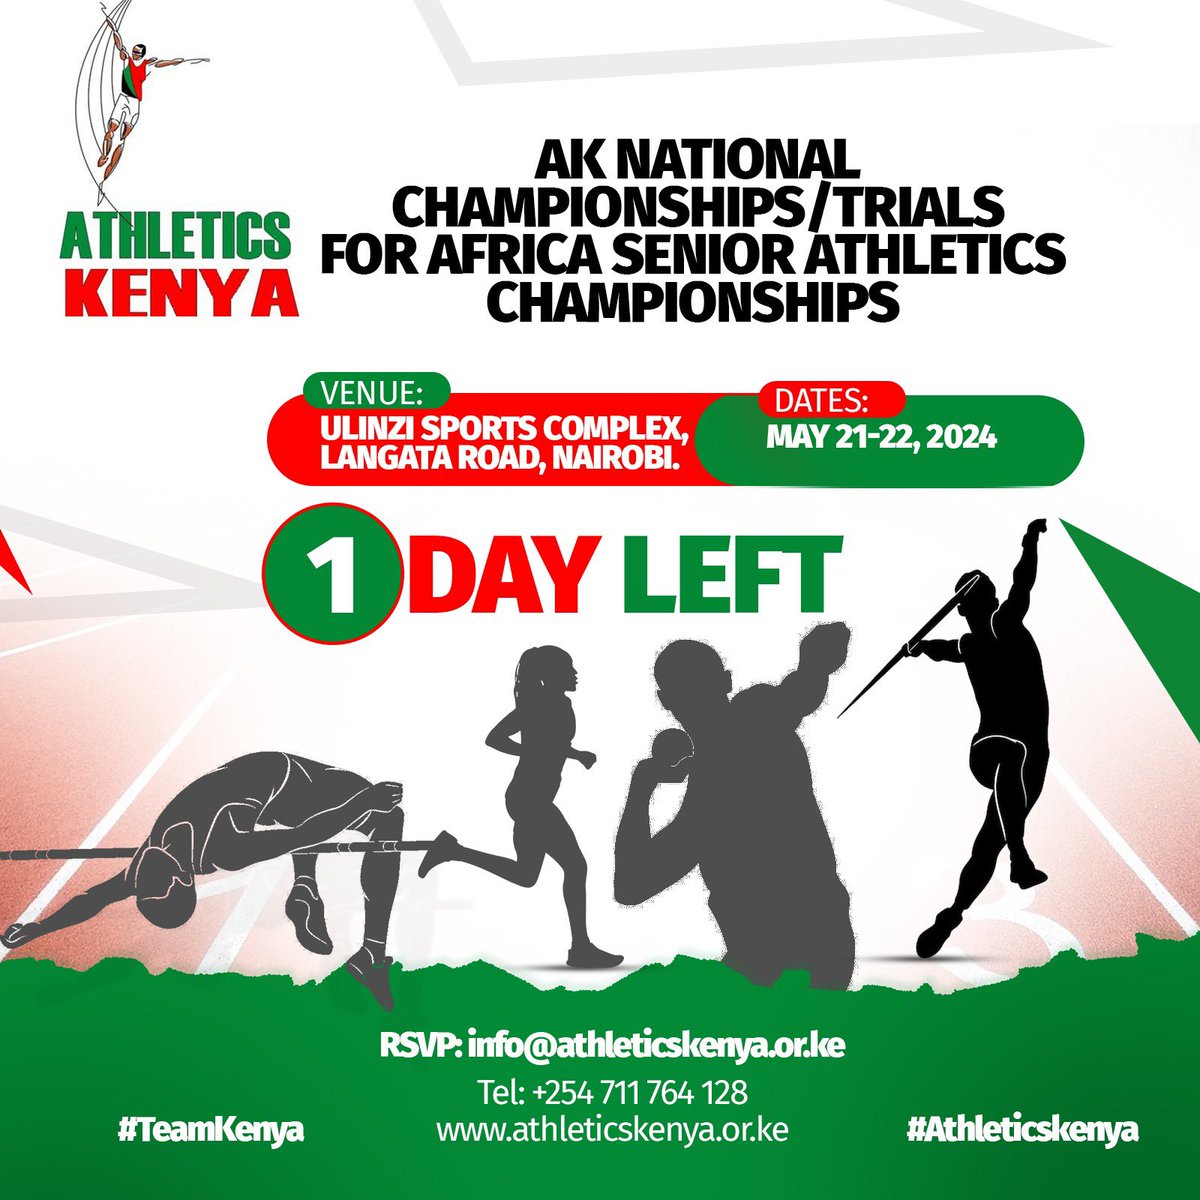 Athletics Kenya 🇰🇪 invite you to the NATIONAL CHAMPIONSHIPS/TRIALS FOR AFRICA SENIOR ATHLETICS CHAMPIONSHIPS 2024. Join us at Ulinzi Sports Complex as we celebrate our athletic stars. VENUE: ULINZI SPORTS COMPLEX, LANGATA ROAD, NAIROBI. Dates: May 21-22, 2024. Time: 8:30AM